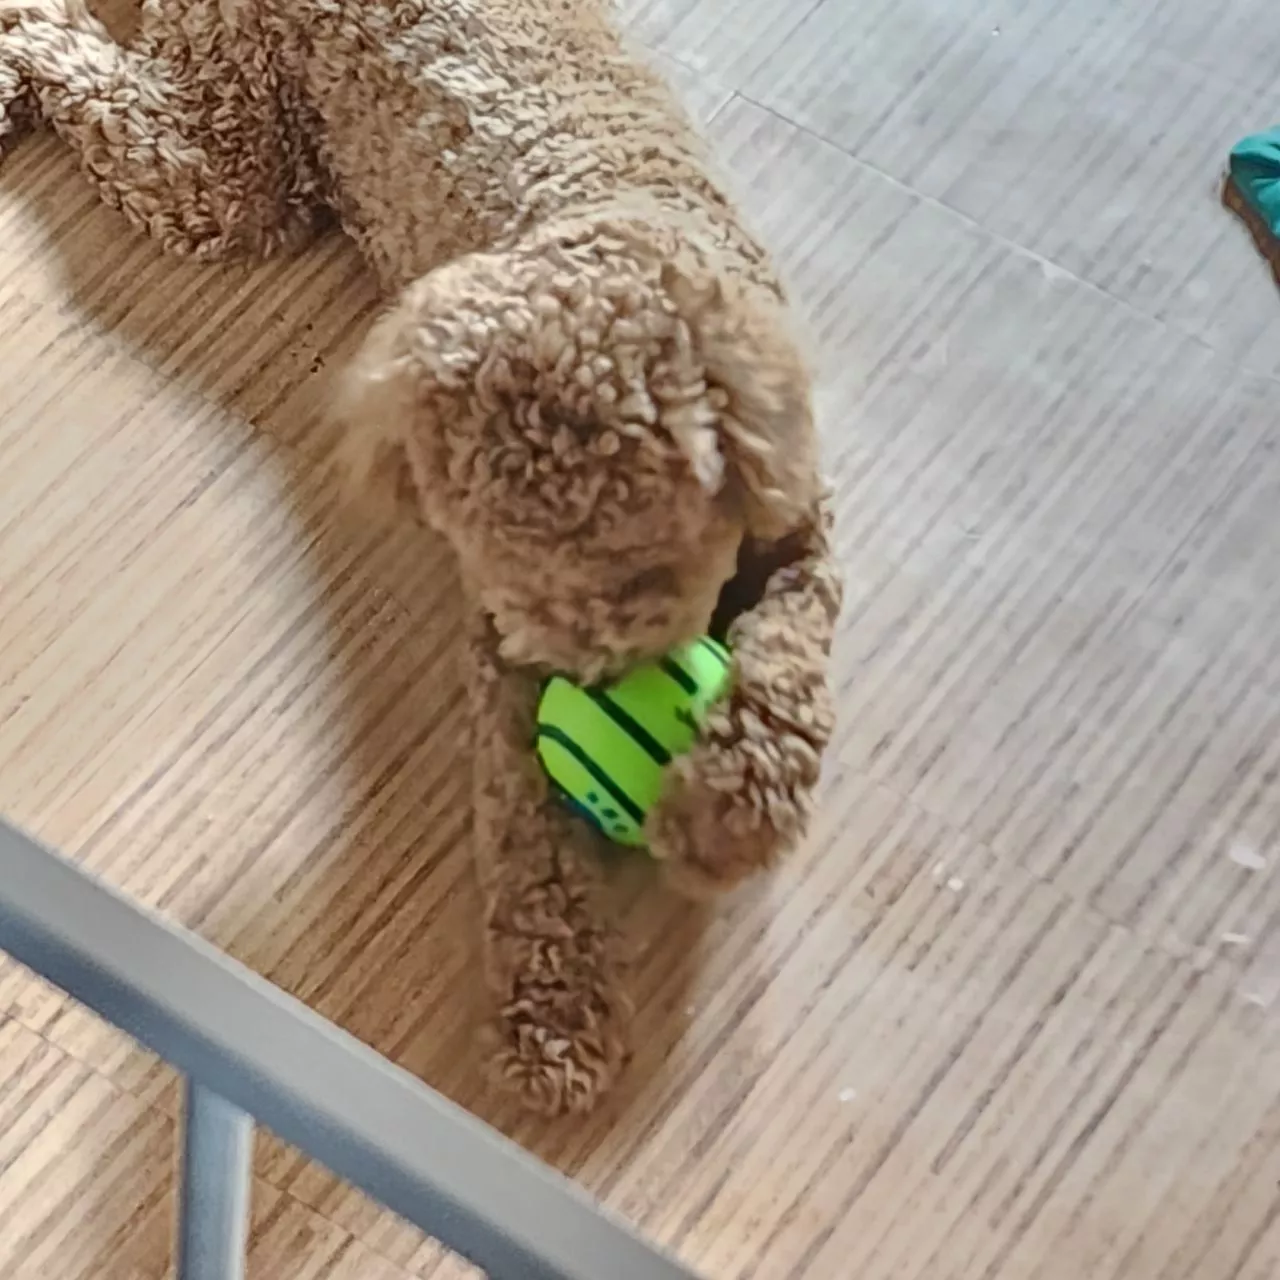 Ball Interactive Dog Toy Fun Giggle Sounds When Rolled photo review